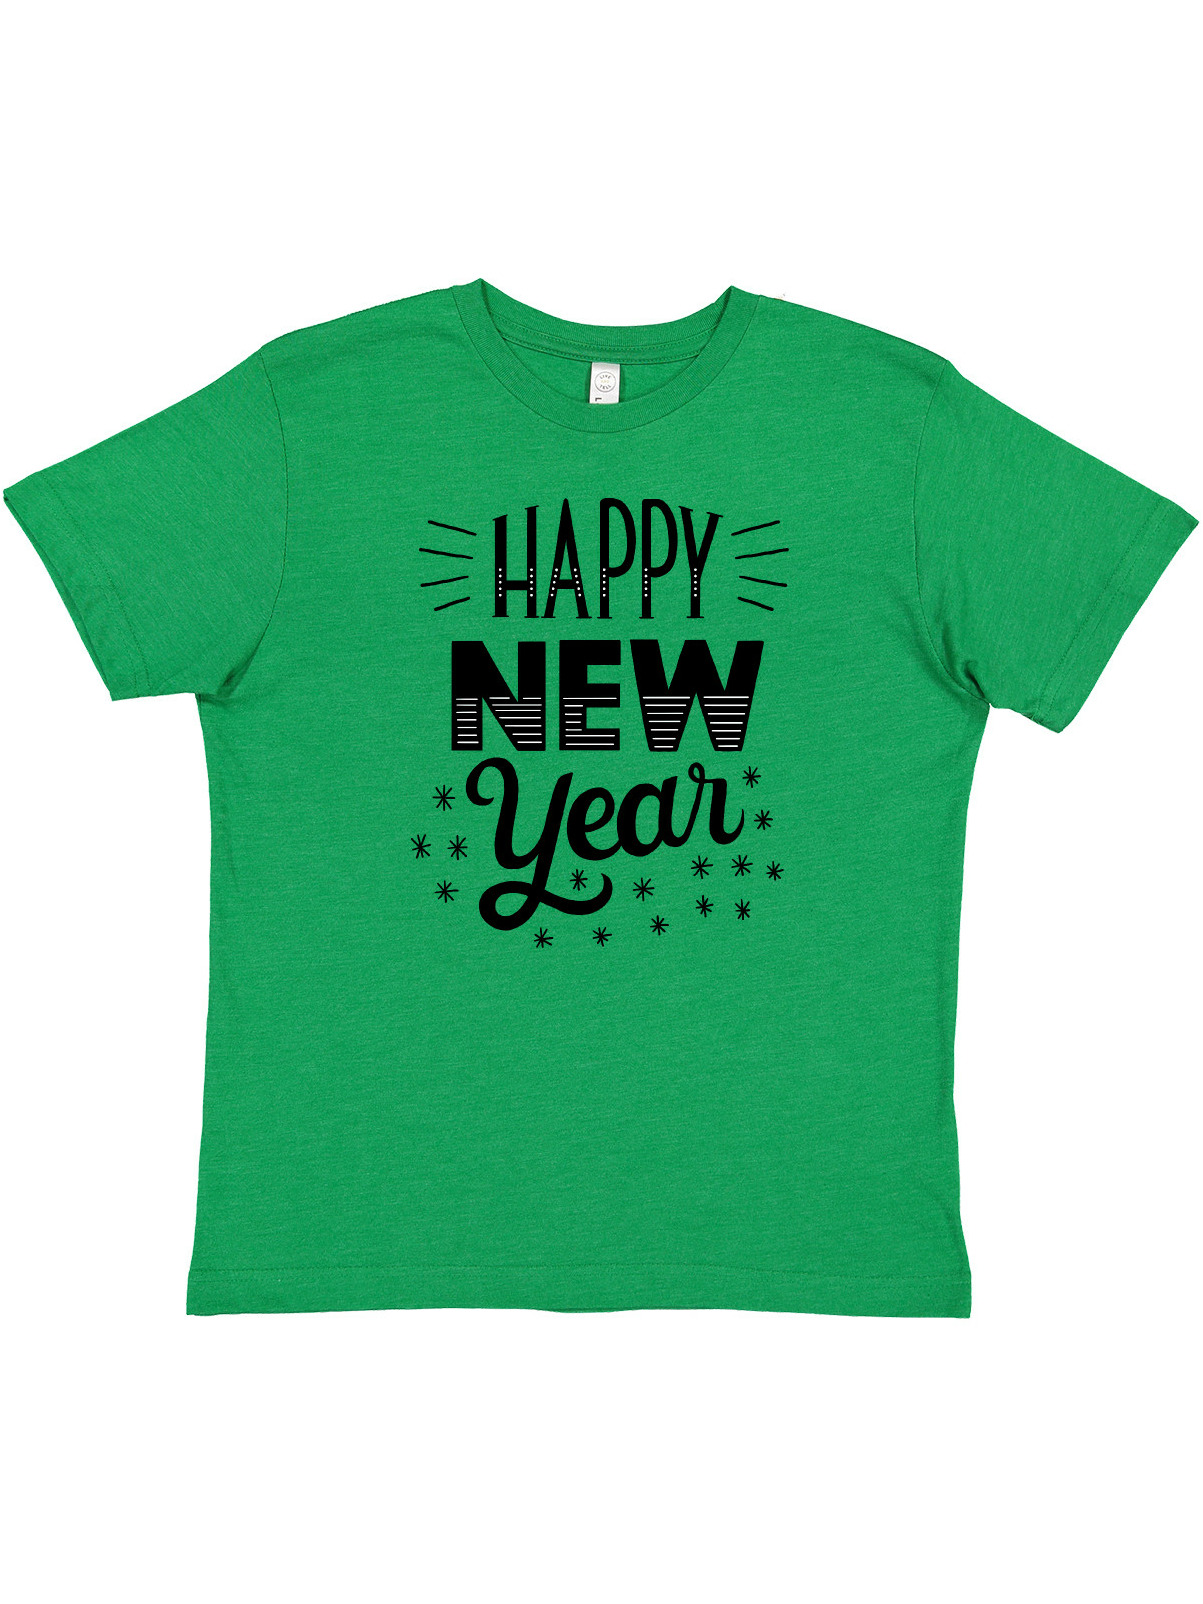 Inktastic Happy New Year in Hand Lettering Youth T-Shirt - image 1 of 4